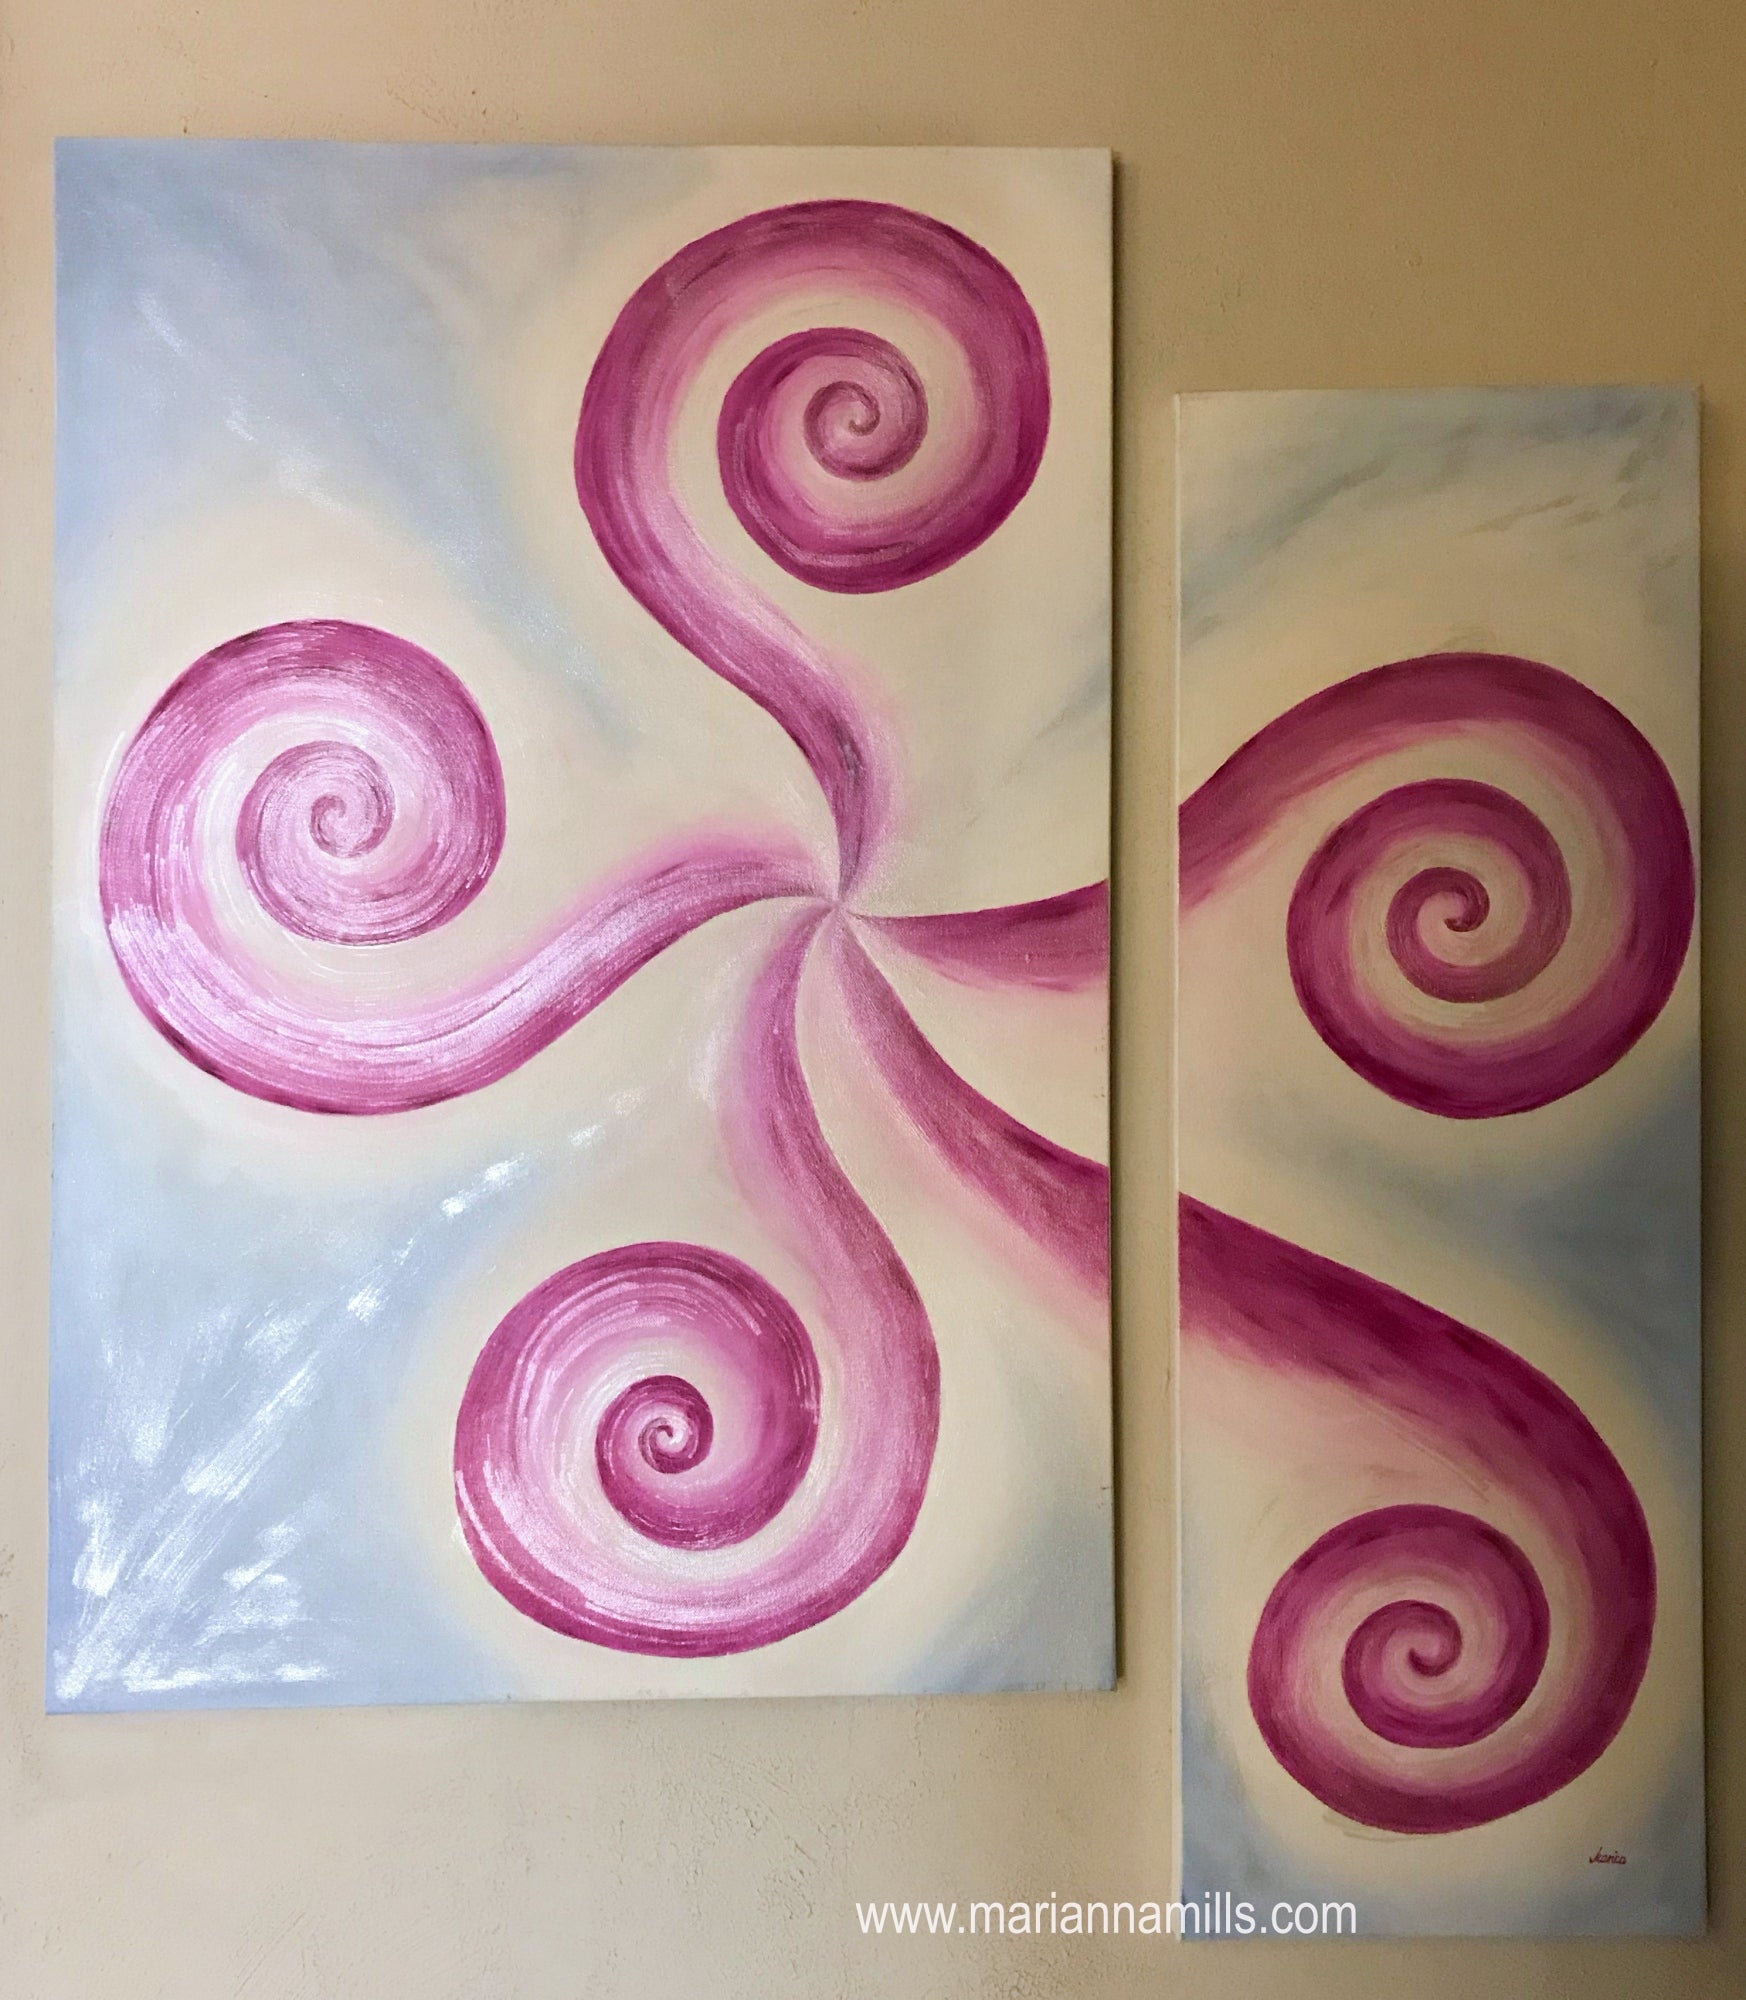 original 2 canvas panel large oil abstract painting with mica powder by Hungarian visionary artist Marianna Mills. Total wall space 43 inches x 38 inches. Title is Thinking it over and over again.. is a beautiful visionary fine art featuring spirals in pink, soft blue and white colors in an ombre effect with shimmering, sparkling mica powder, this is silver, indigo and iridescent give a desired effect to this amazing artwork. No need framing, ready to hang on your wall.